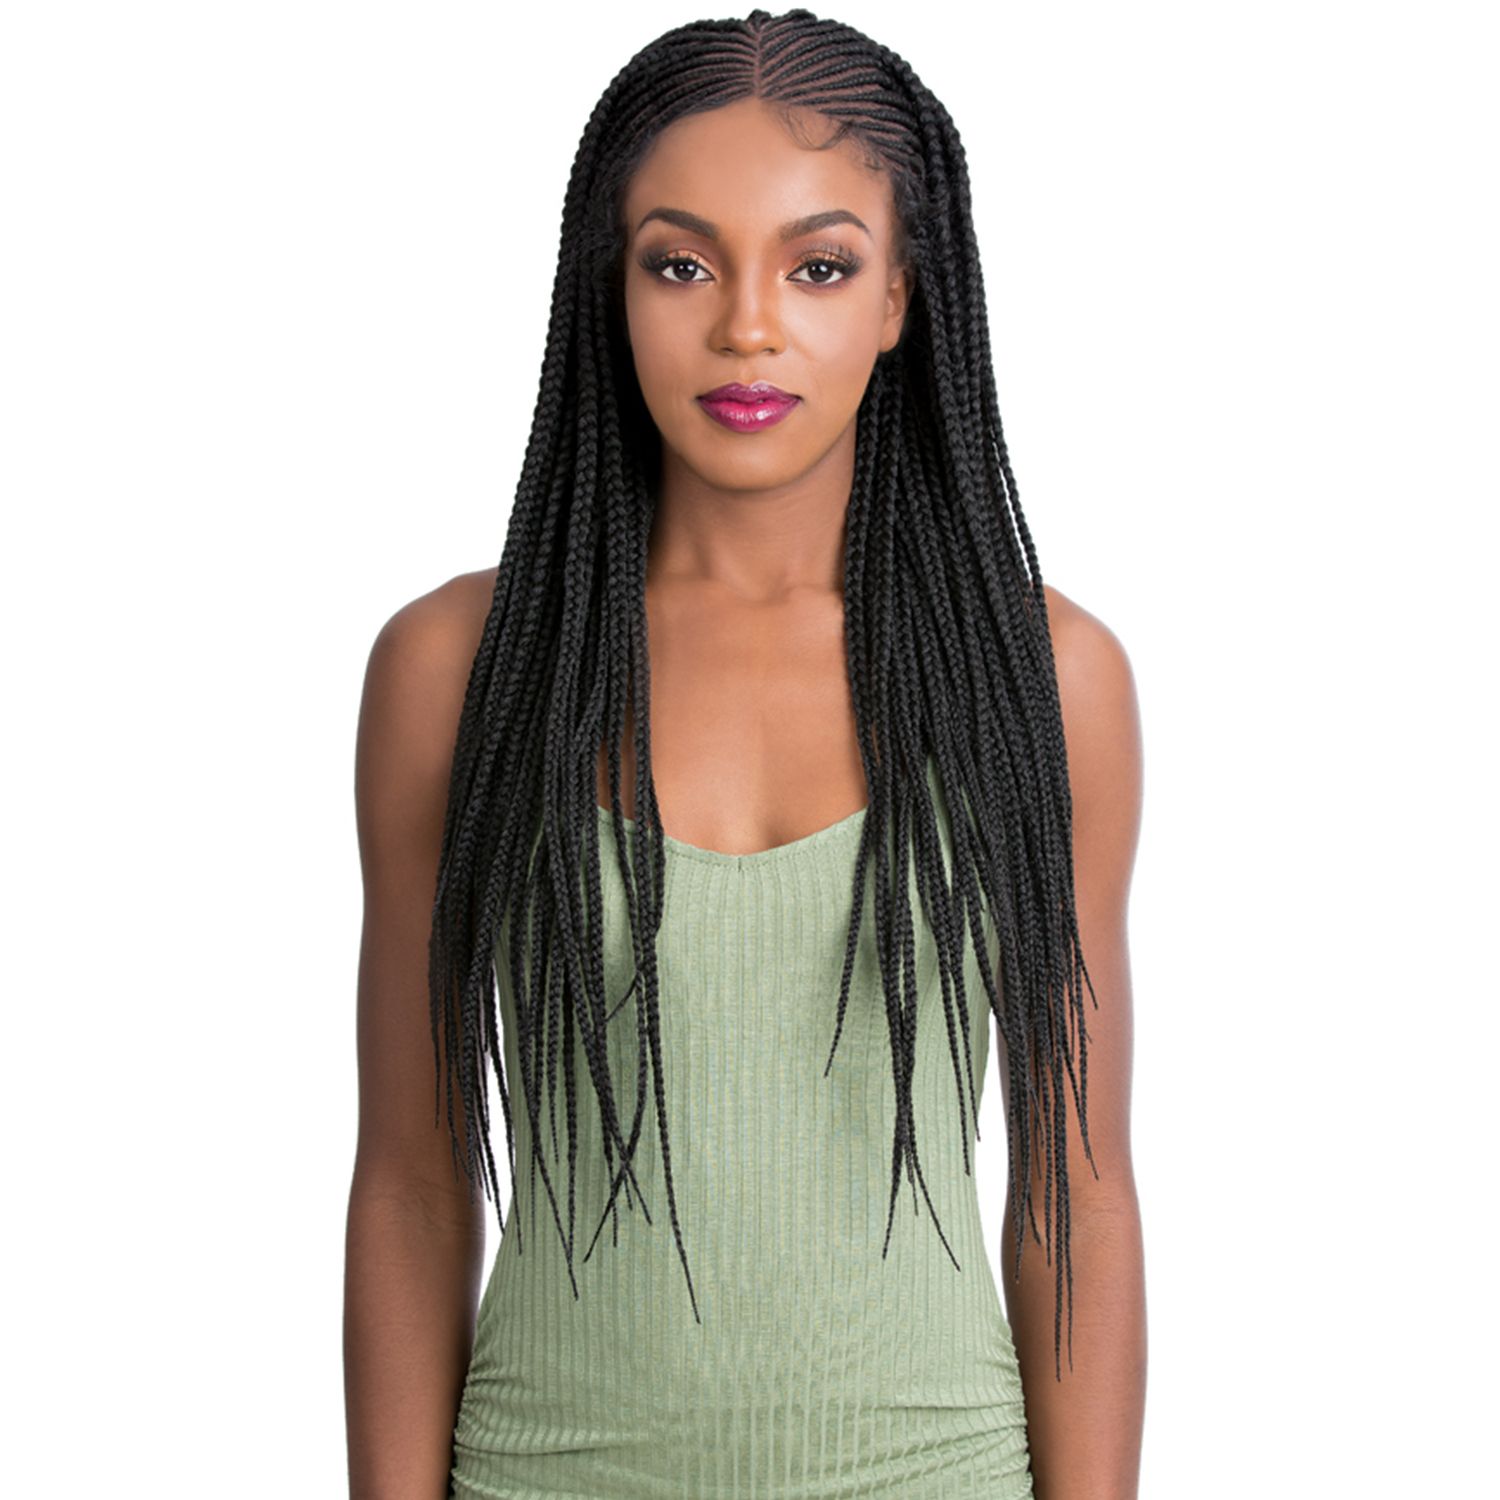 Newest Renaissance Micro Braid Hairstyles Pertaining To It's A Wig Synthetic Hair Lace Front Wig Swiss Lace Braided Wig Micro  Cornrow Box Braid (View 15 of 20)